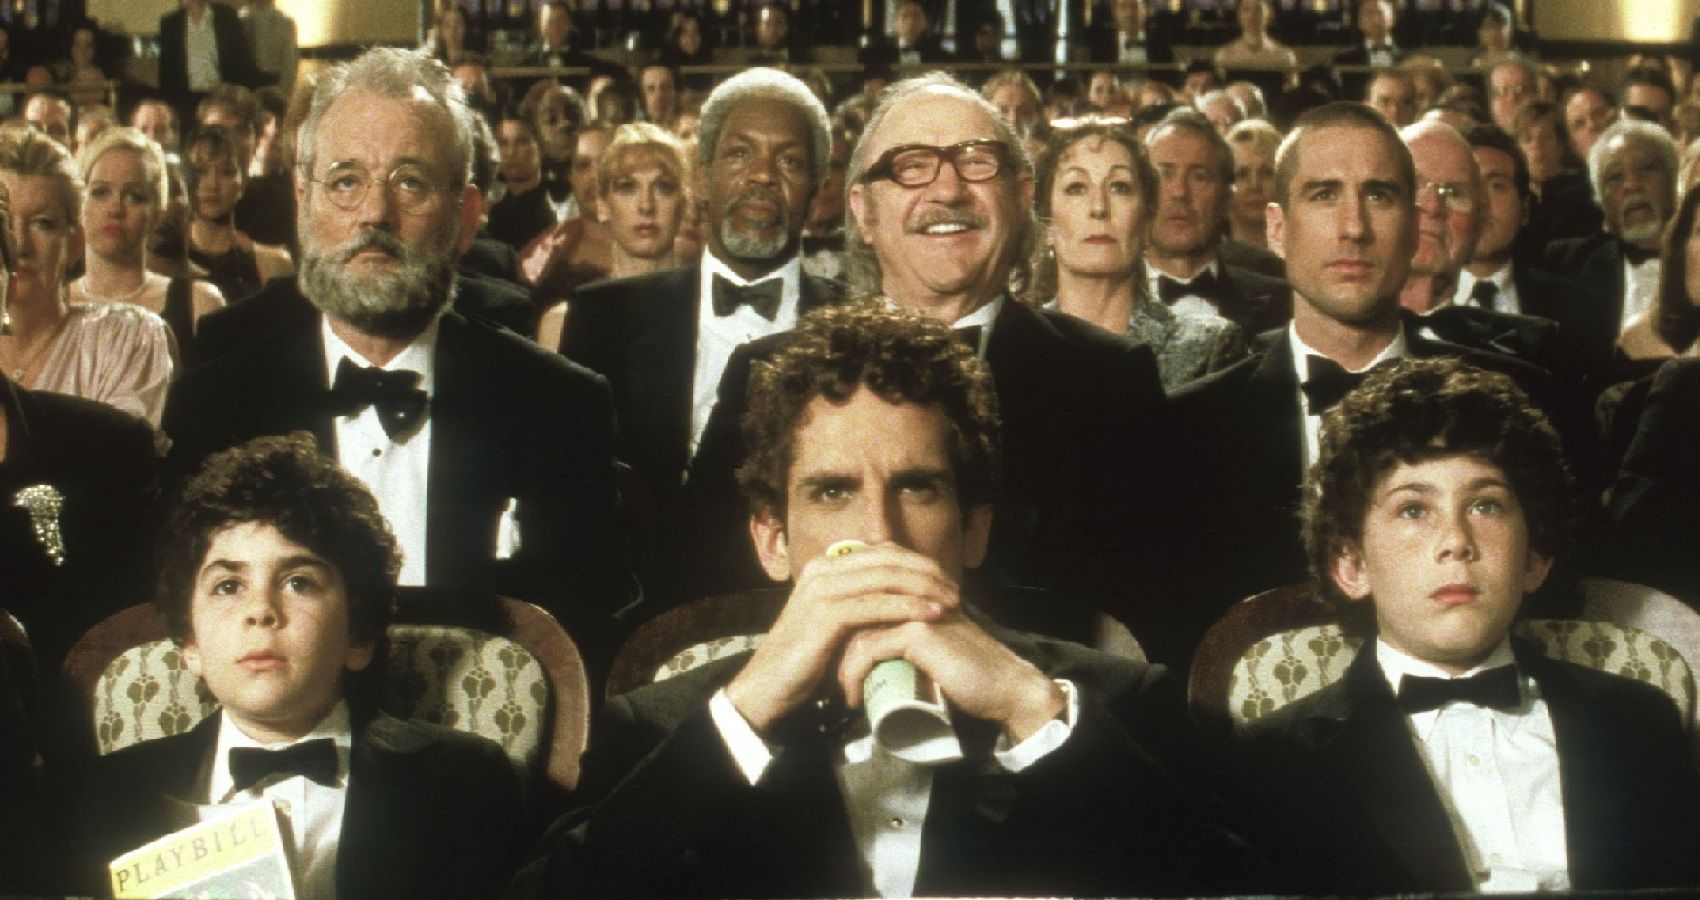 Several members of The Royal Tenenbaums cast, including Bill Murray, Danny Glover, Ben Stiller, Gene Hackman, Anjelica Huston, and Luke Wilson, wearing tuxedos in a still image from the Wes Anderson film